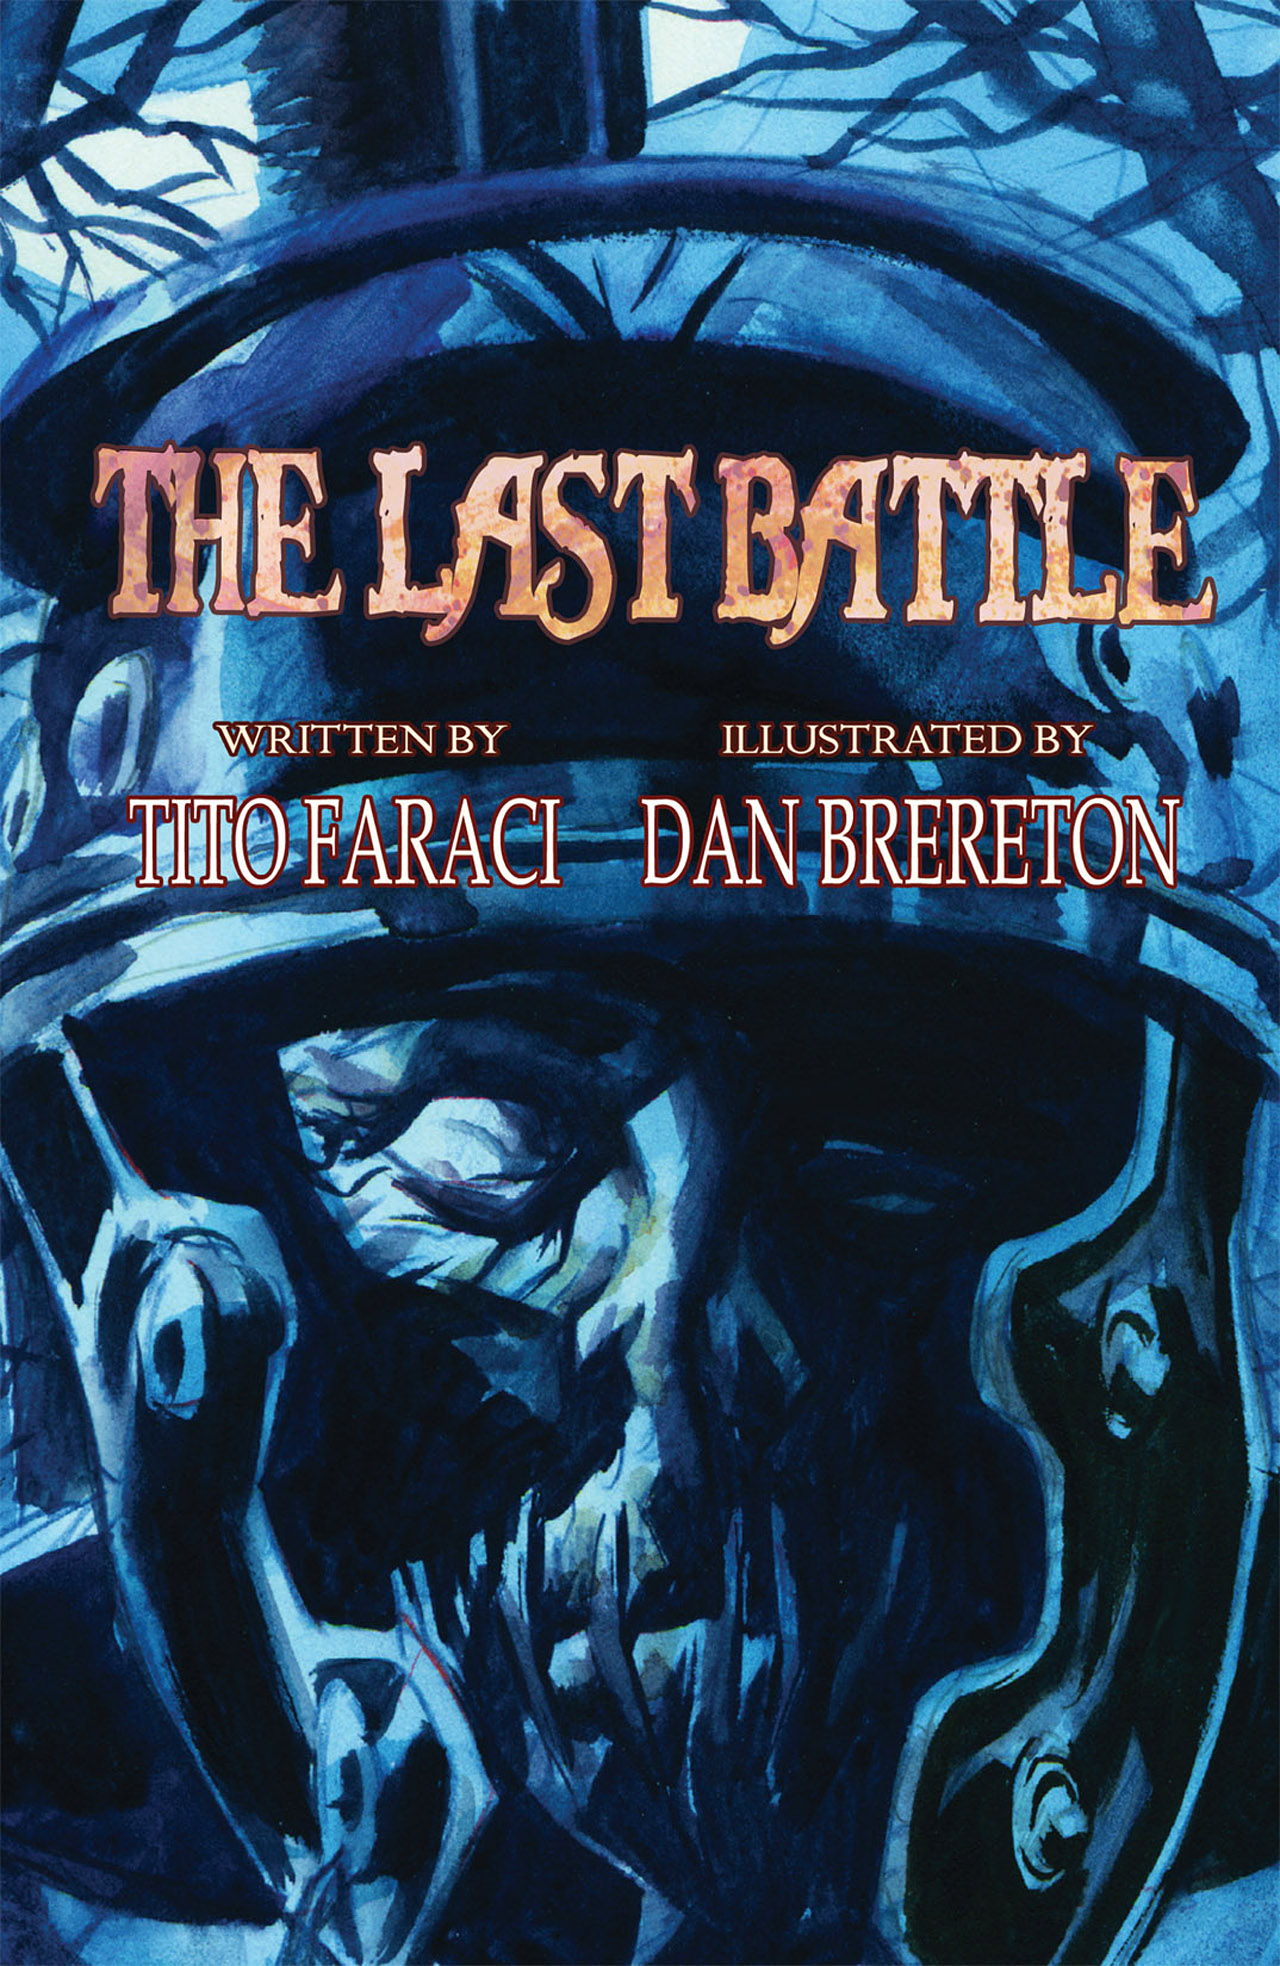 Read online The Last Battle comic -  Issue # TPB - 3